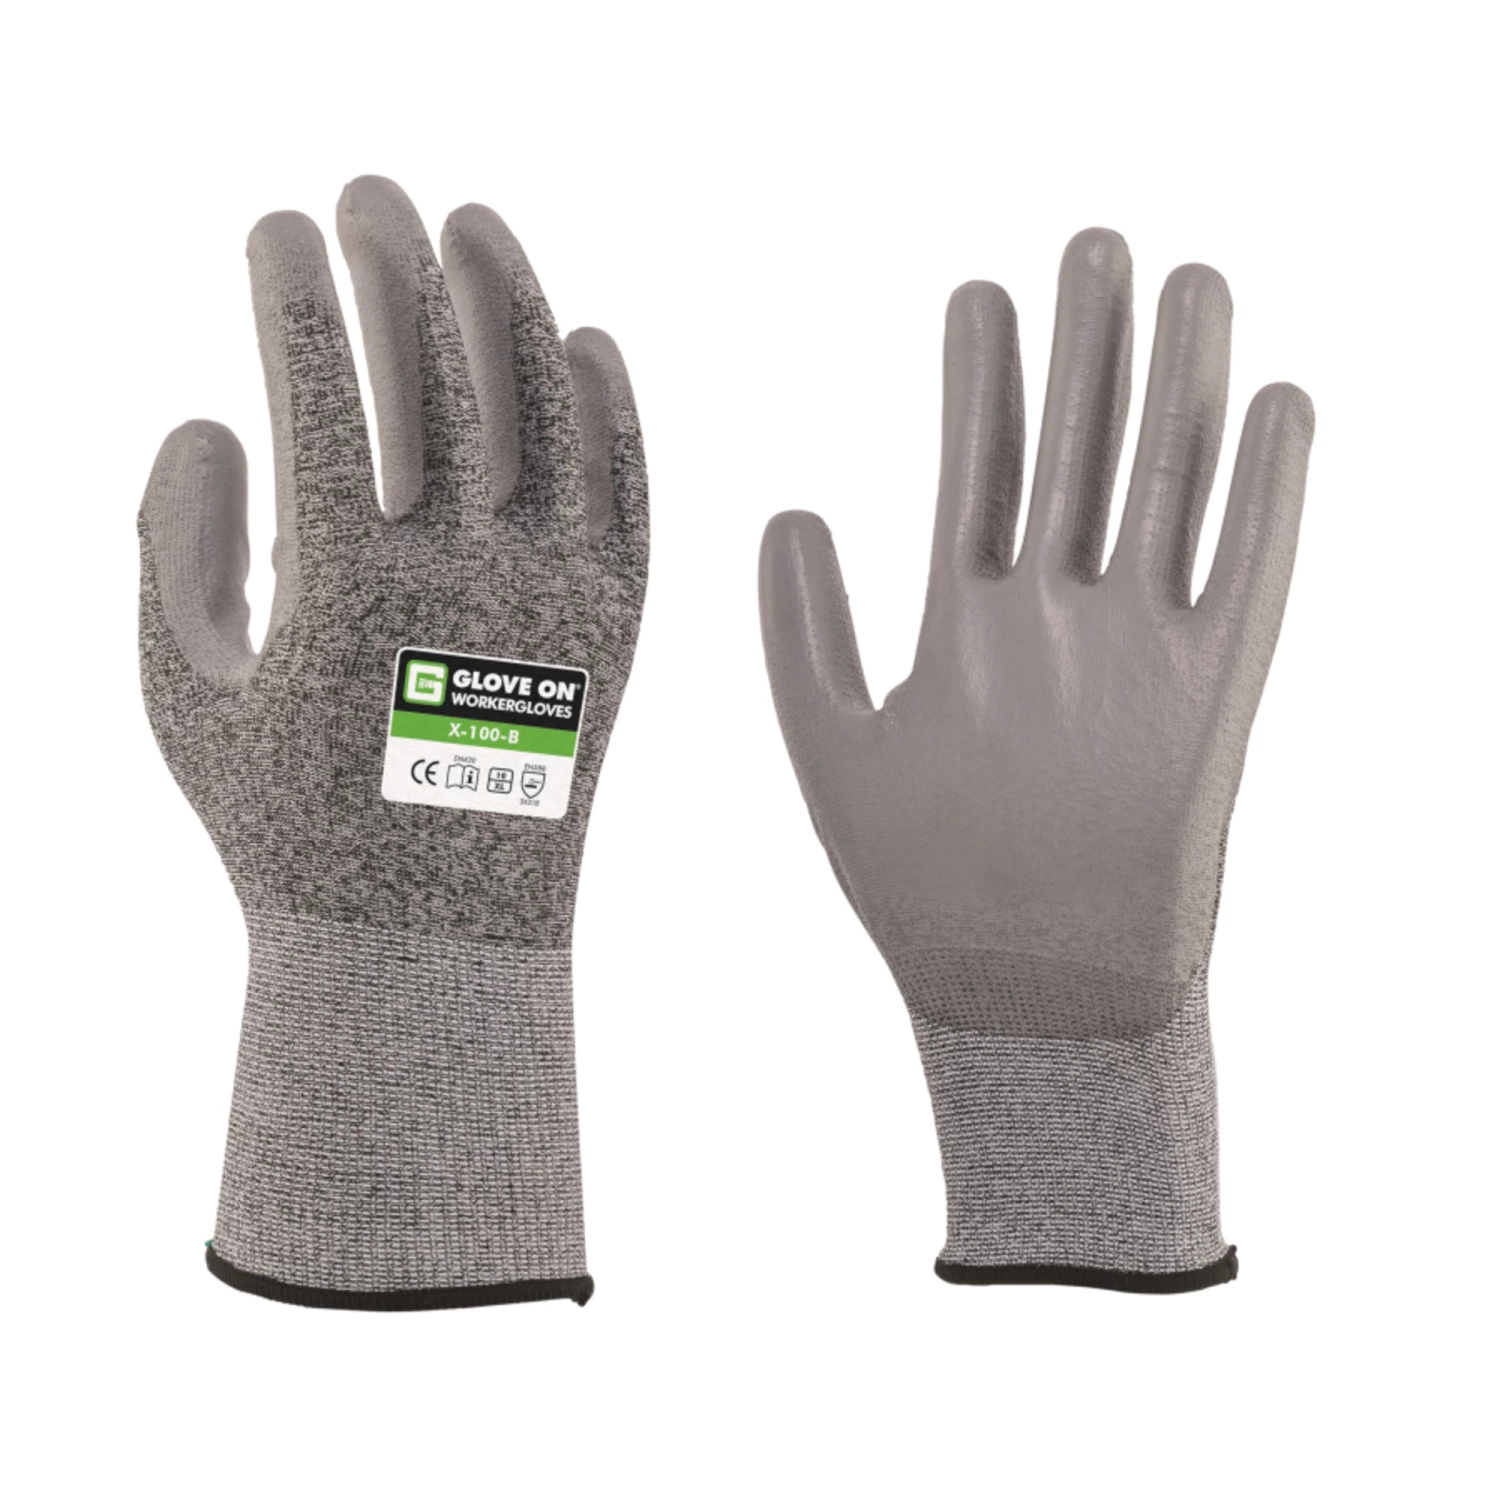 Gant de travail Glove On Protect X 100 B - taille 10